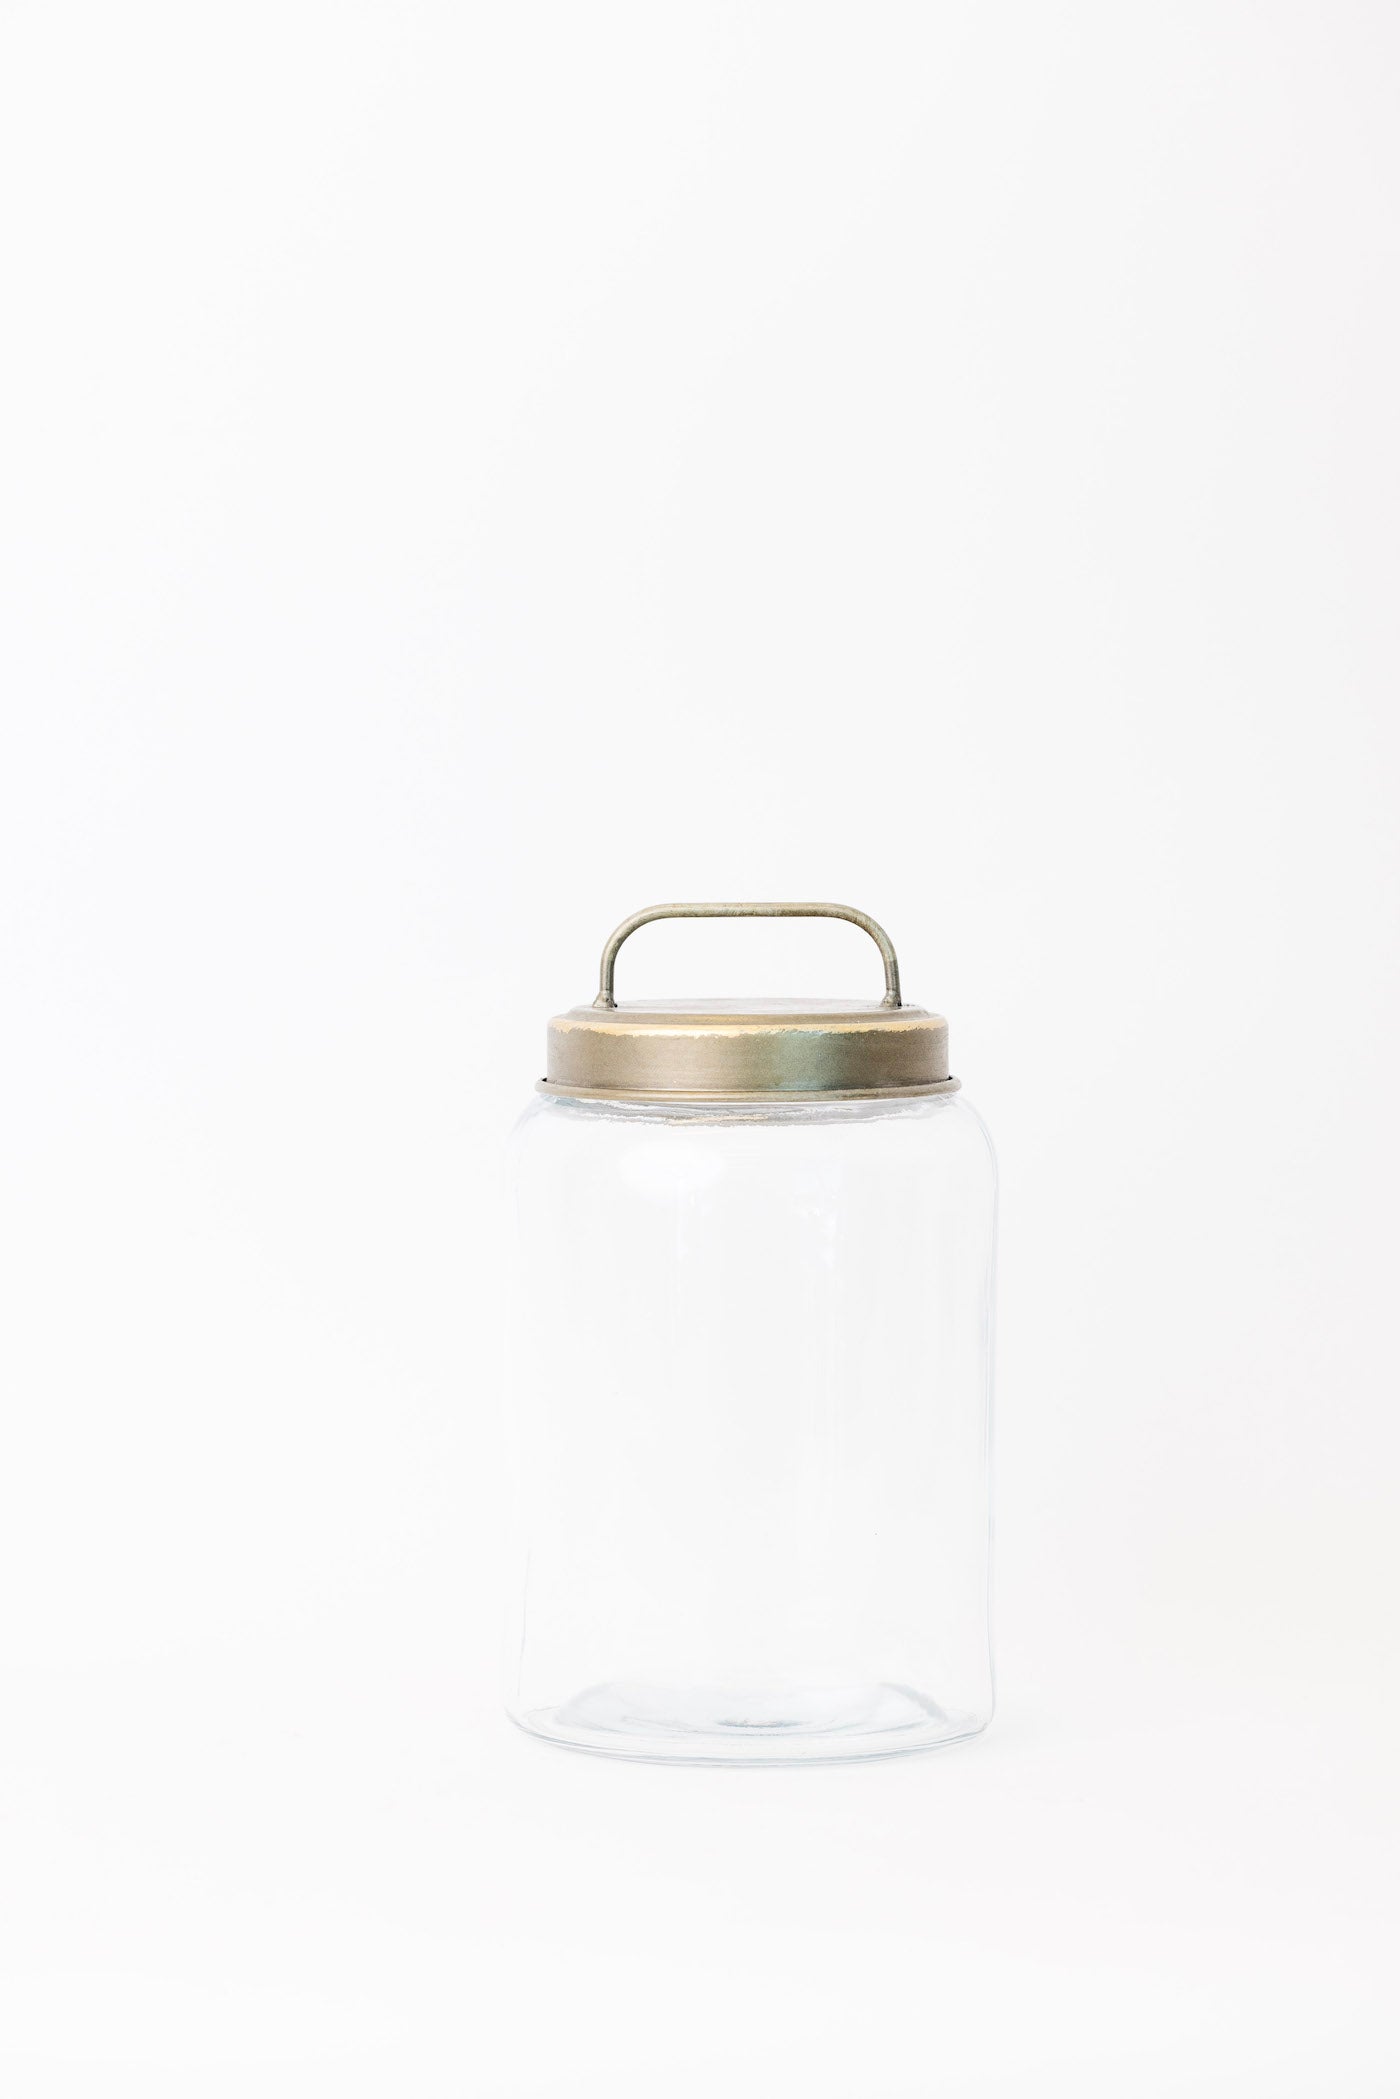 Amara Canister w/ Metal Lid - 3 Sizes